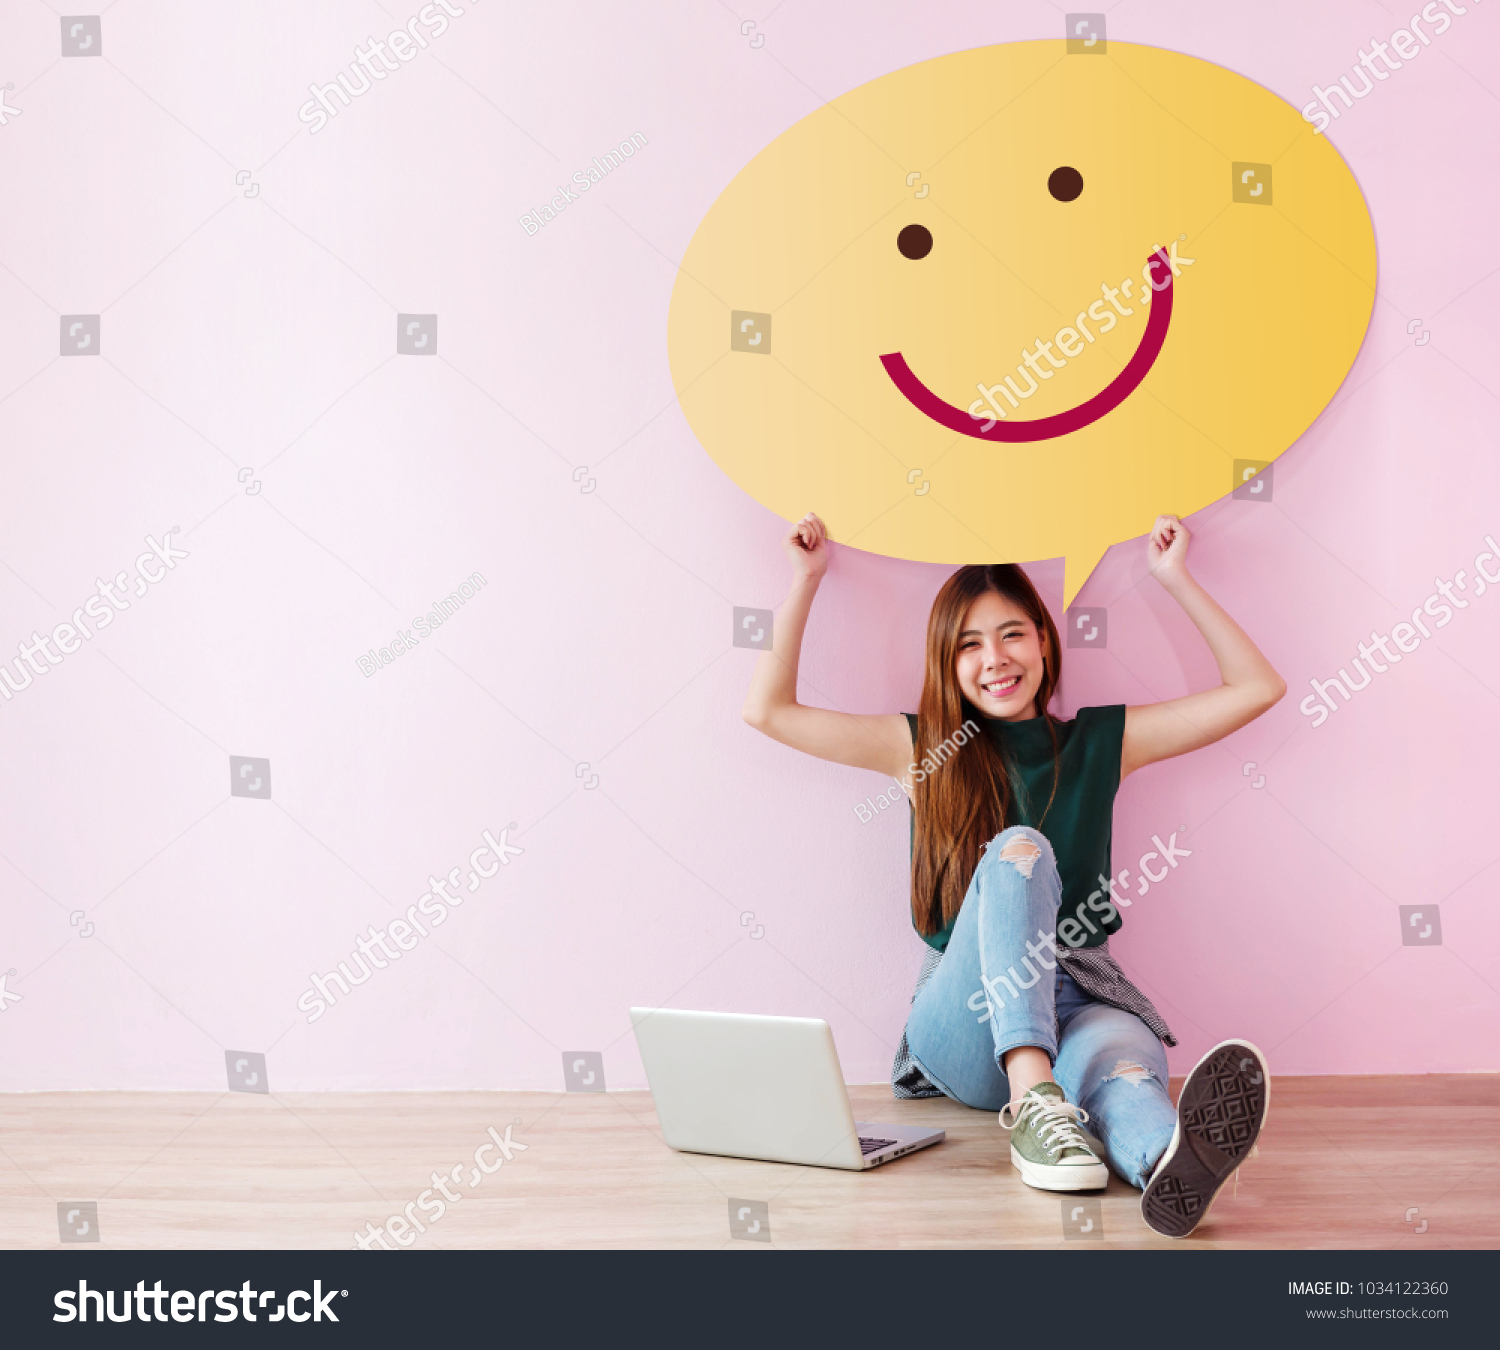 Happy Customer Concept. Review and Feedback her Experience for Satisfaction Survey Online. Young Female in Cheerful Posture, Raise up Speech Bubble with Smiley Face. Sit on the Floor with Laptop #1034122360